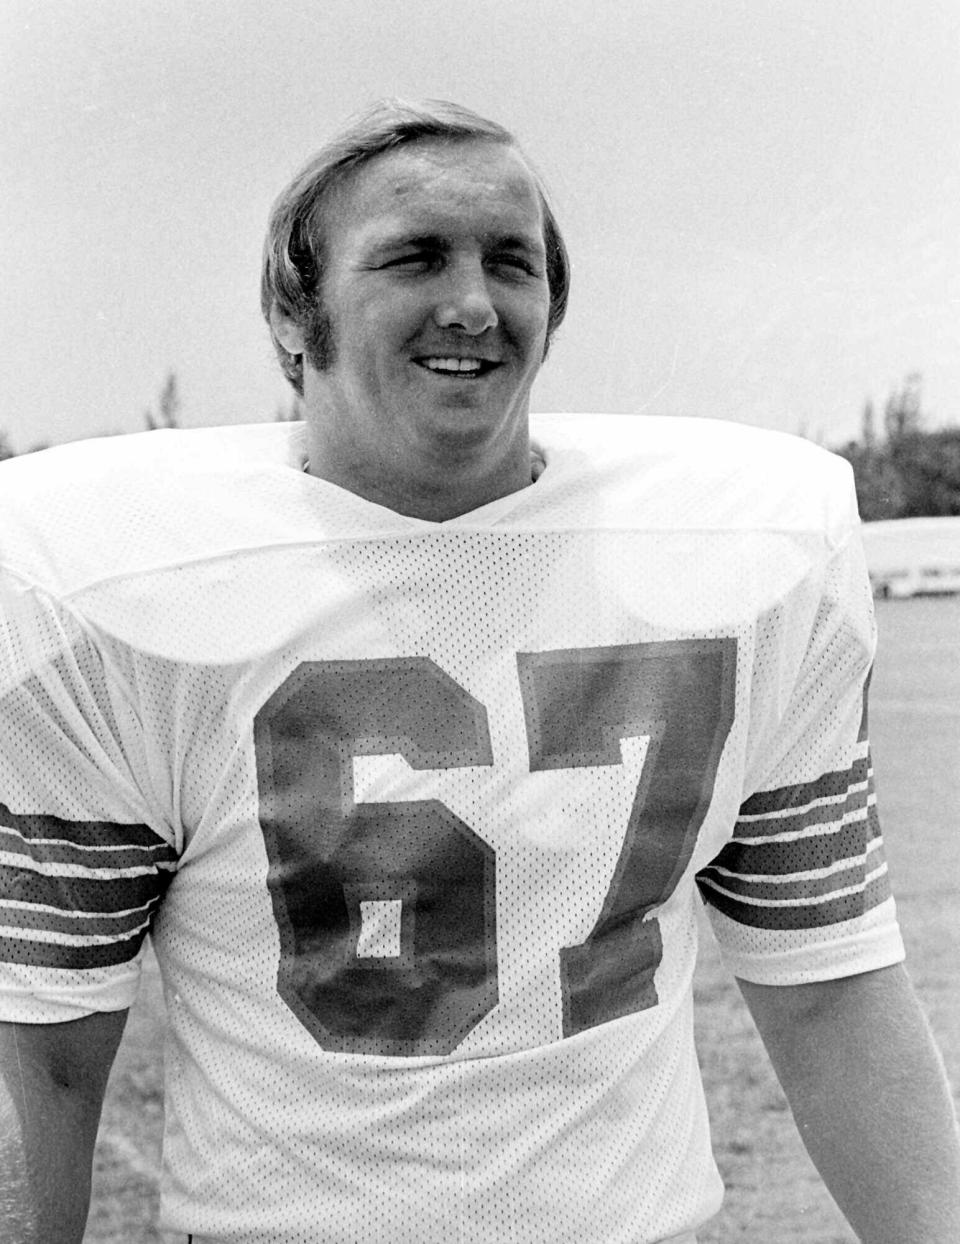 FILE - In this July 18, 1973, file photo, Miami Dolphins' Bob Kuechenberg smiles. Former Dolphins guard Kuechenberg, a six-time Pro Bowl selection and member of the only NFL team to achieve a perfect season, died at age 71. His death Saturday, Jan. 12, 2019, was confirmed by the Dolphins, who had no further details. AP Photo/Jack Kanthal,File)